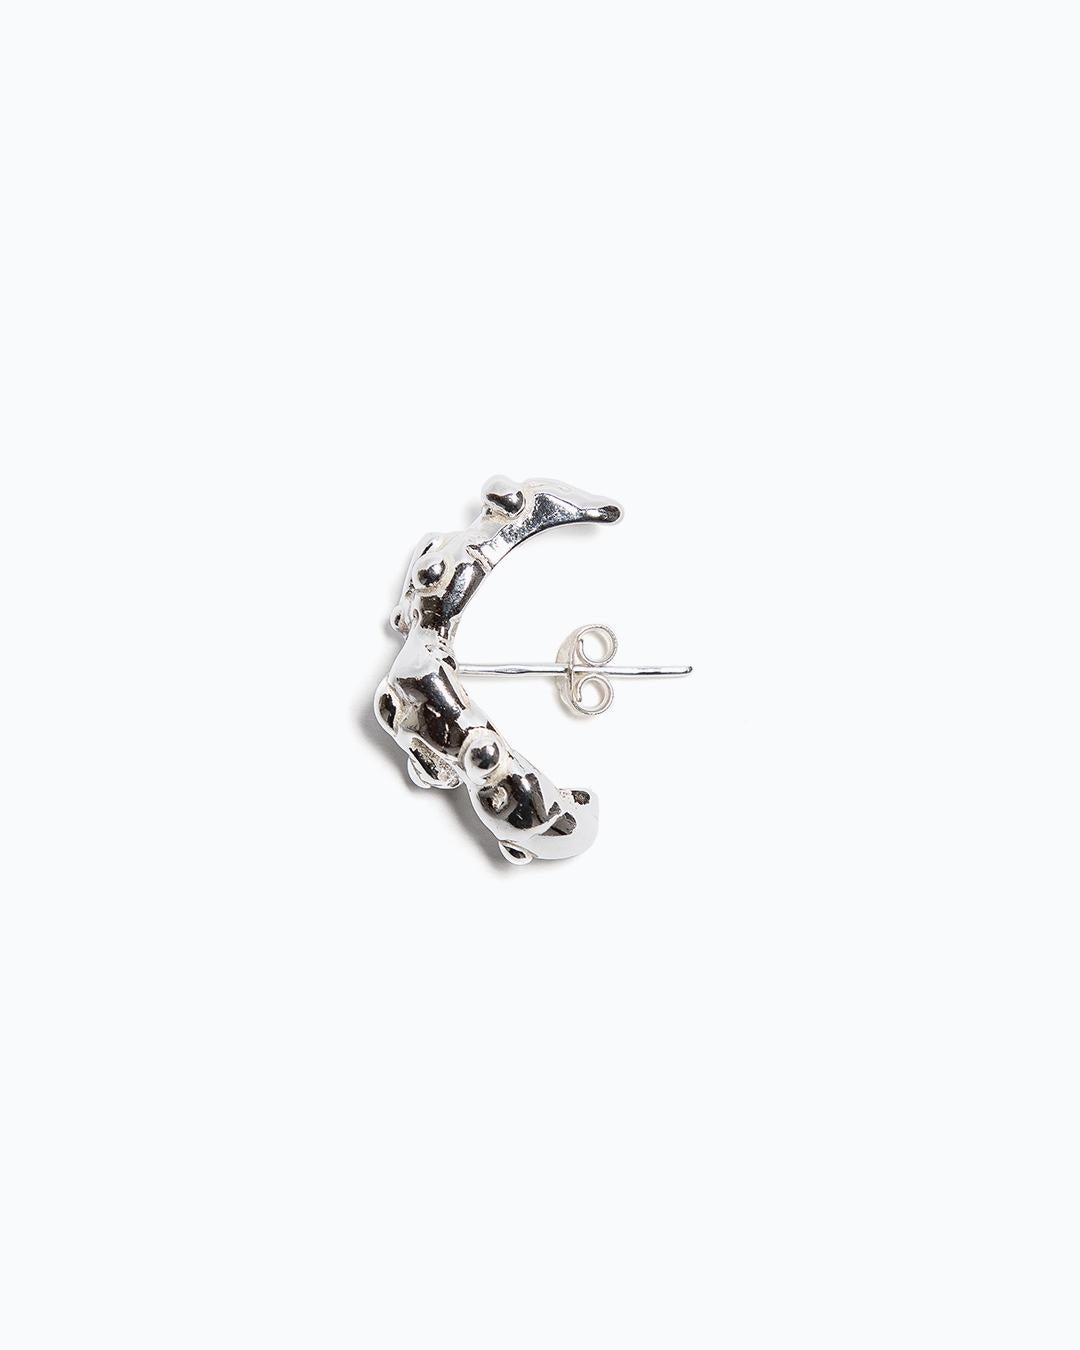 Rigido's NaOH is a silver earring with an organic shape and butterfly fastening. Sold as single, this earring is for pierced ears.

Available in Sterling silver or Vermeil.

Handcrafted in Spain, this is a unique and quality piece.

We work with the